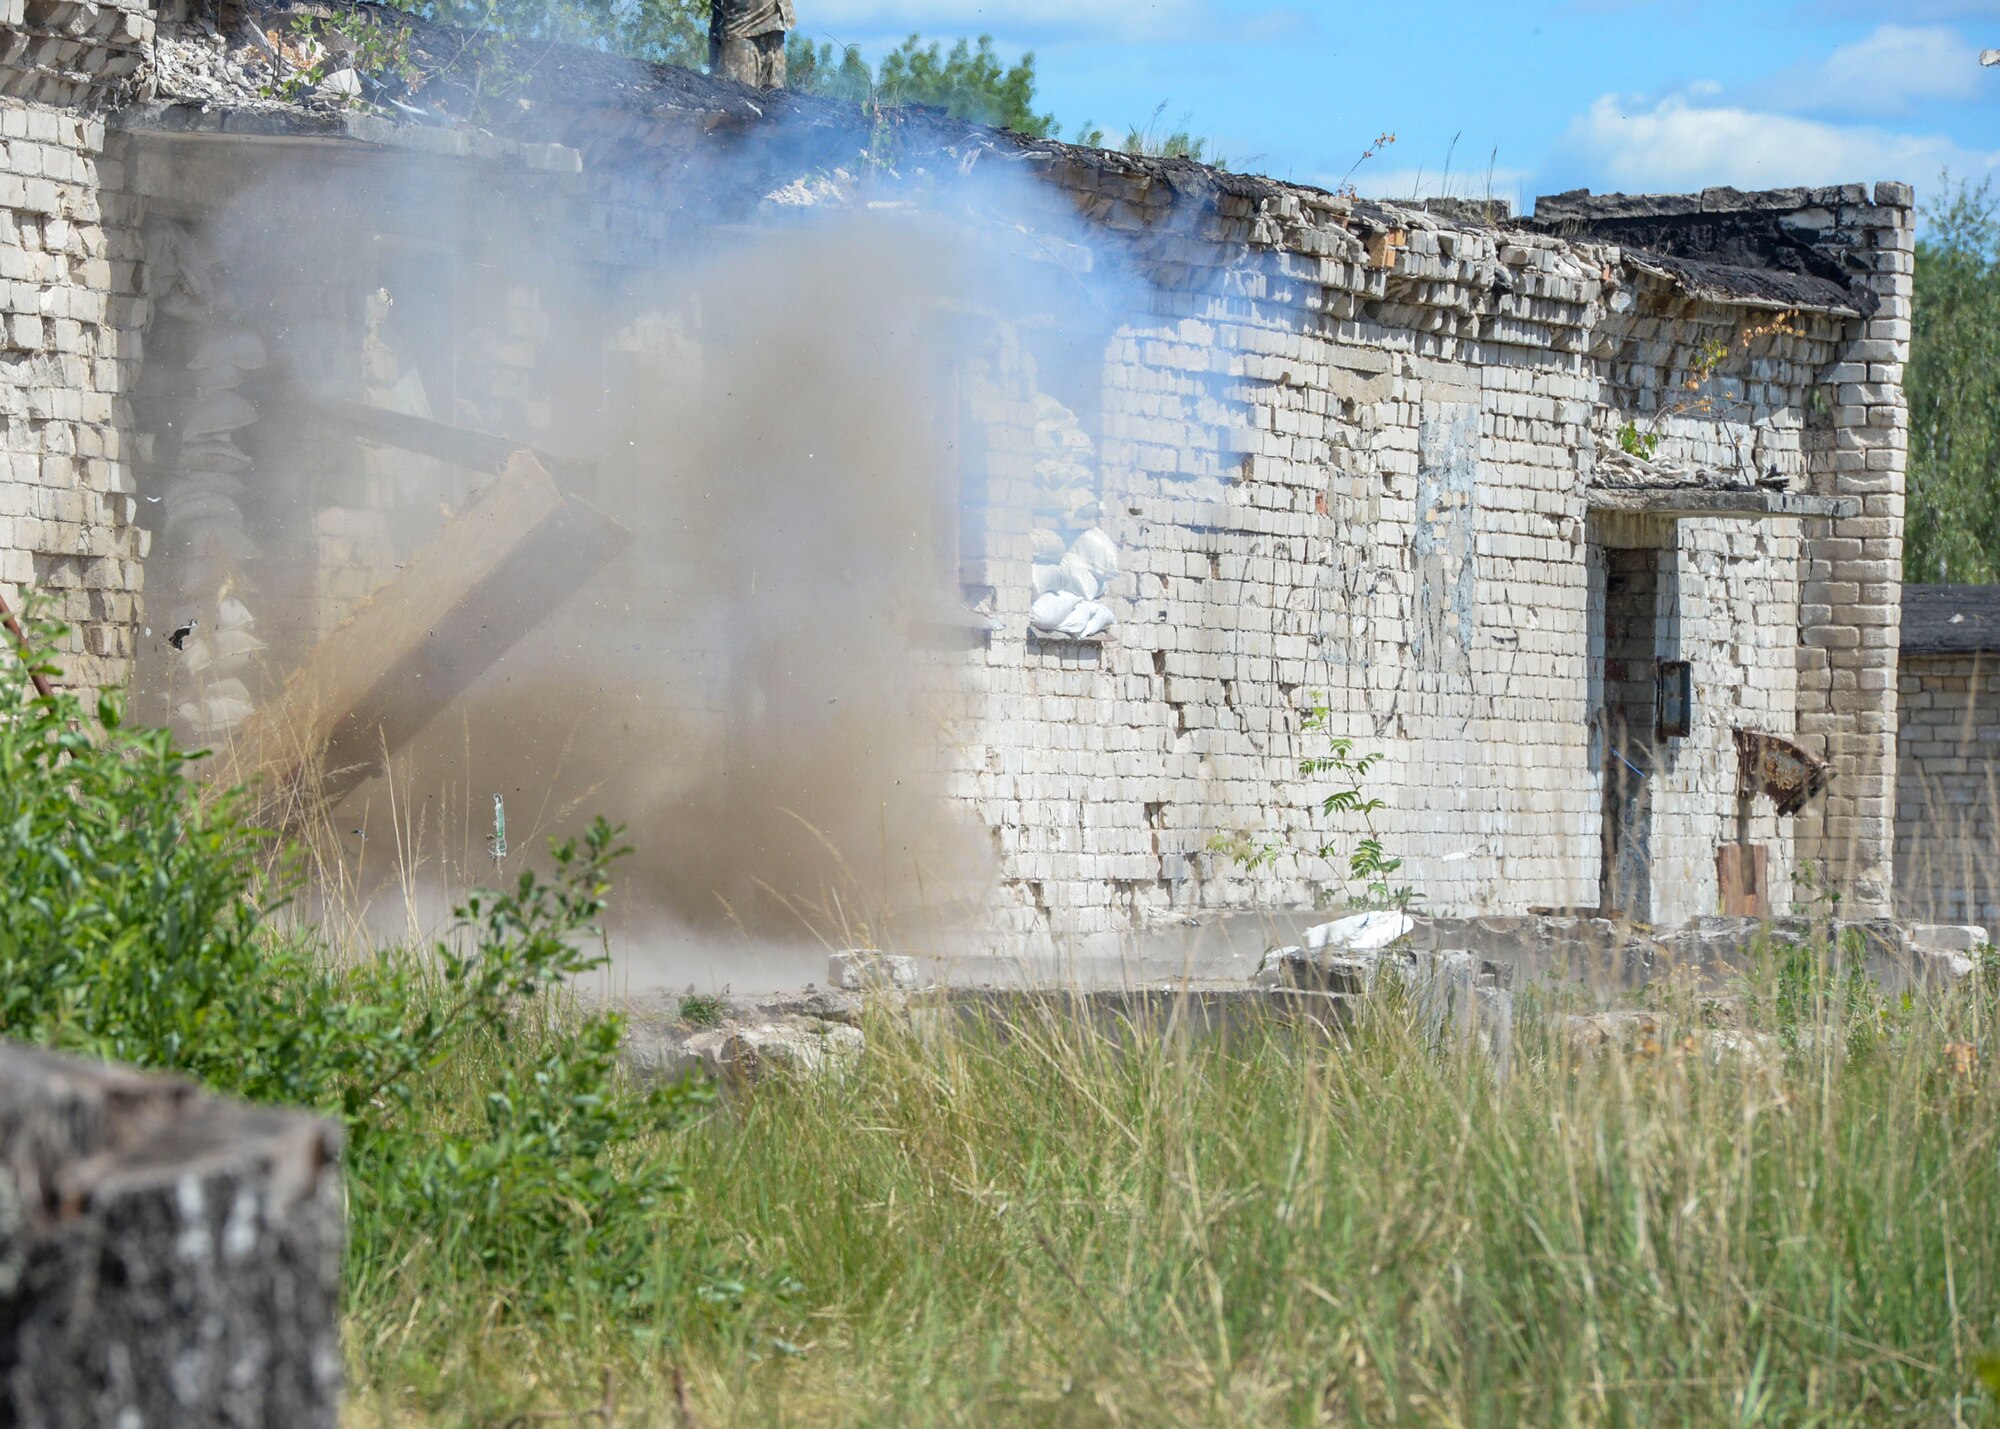 A door blows open by the force of a detonated charge during an exercise in Skrunda, Latvia on June 13, 2018. Attacking Forces comprised of U.S. Marines, United Kingdom Royal Marines, Michigan Army National Guard, and Norwegian Forces during a battle simulation for Saber Strike. Saber Strike 18 is the eighth iteration of the long-standing U.S. Army Europe-led cooperative training exercise enhancing interoperability among allies and regional partners. (U.S. Air Force photo by Staff Sgt. Jimmie D. Pike)